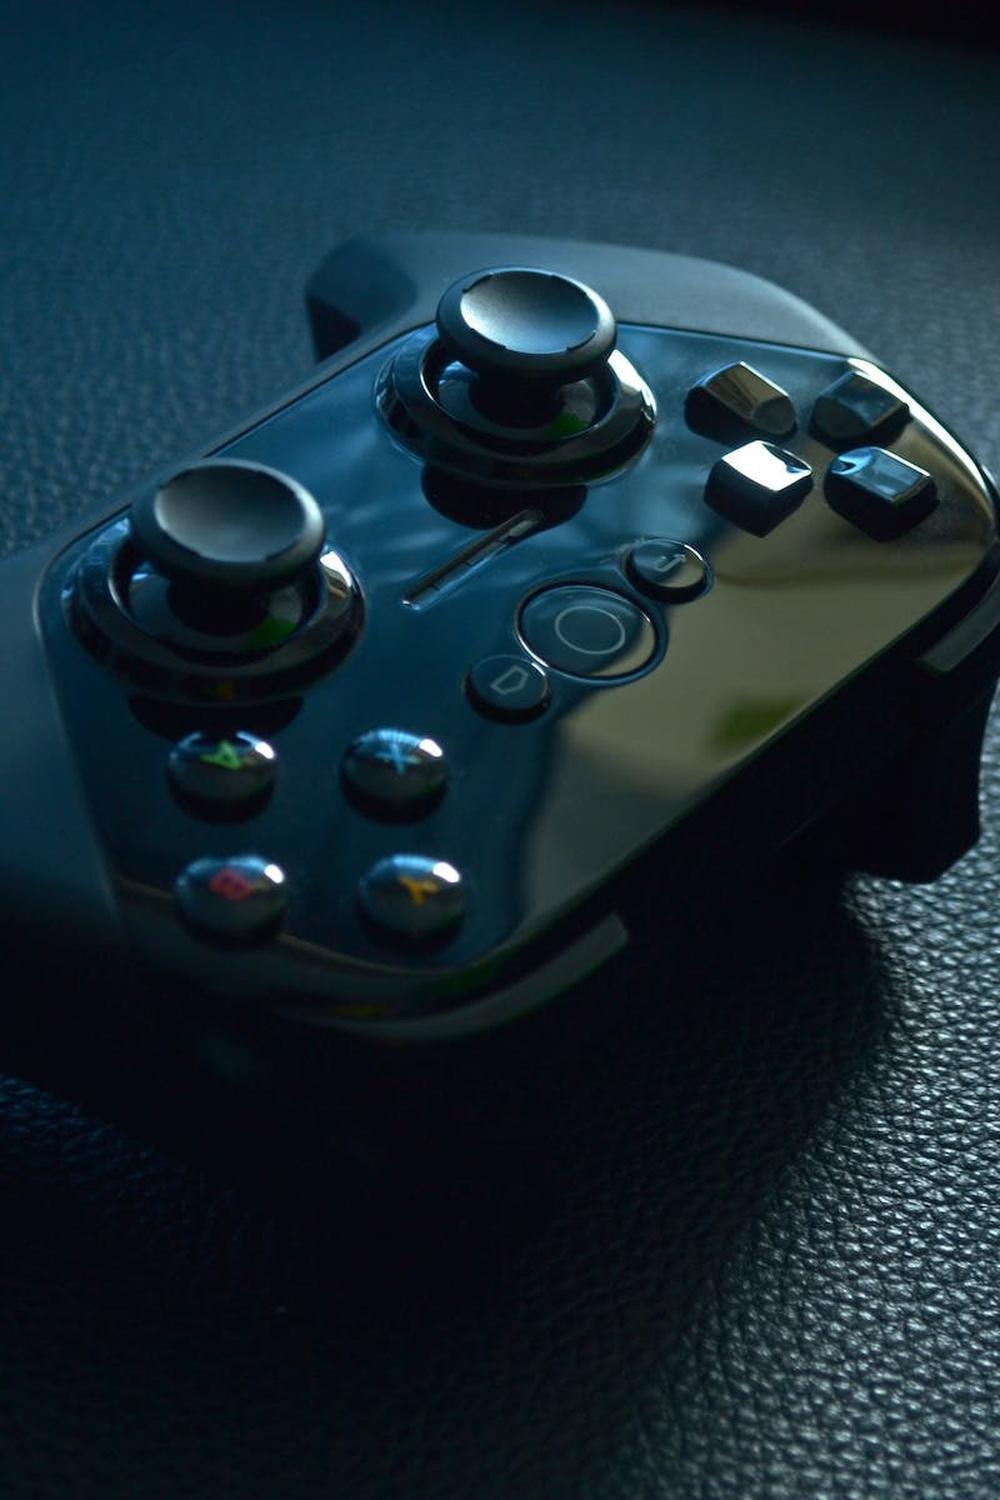 black_wireless_game_controller_on_black_leather